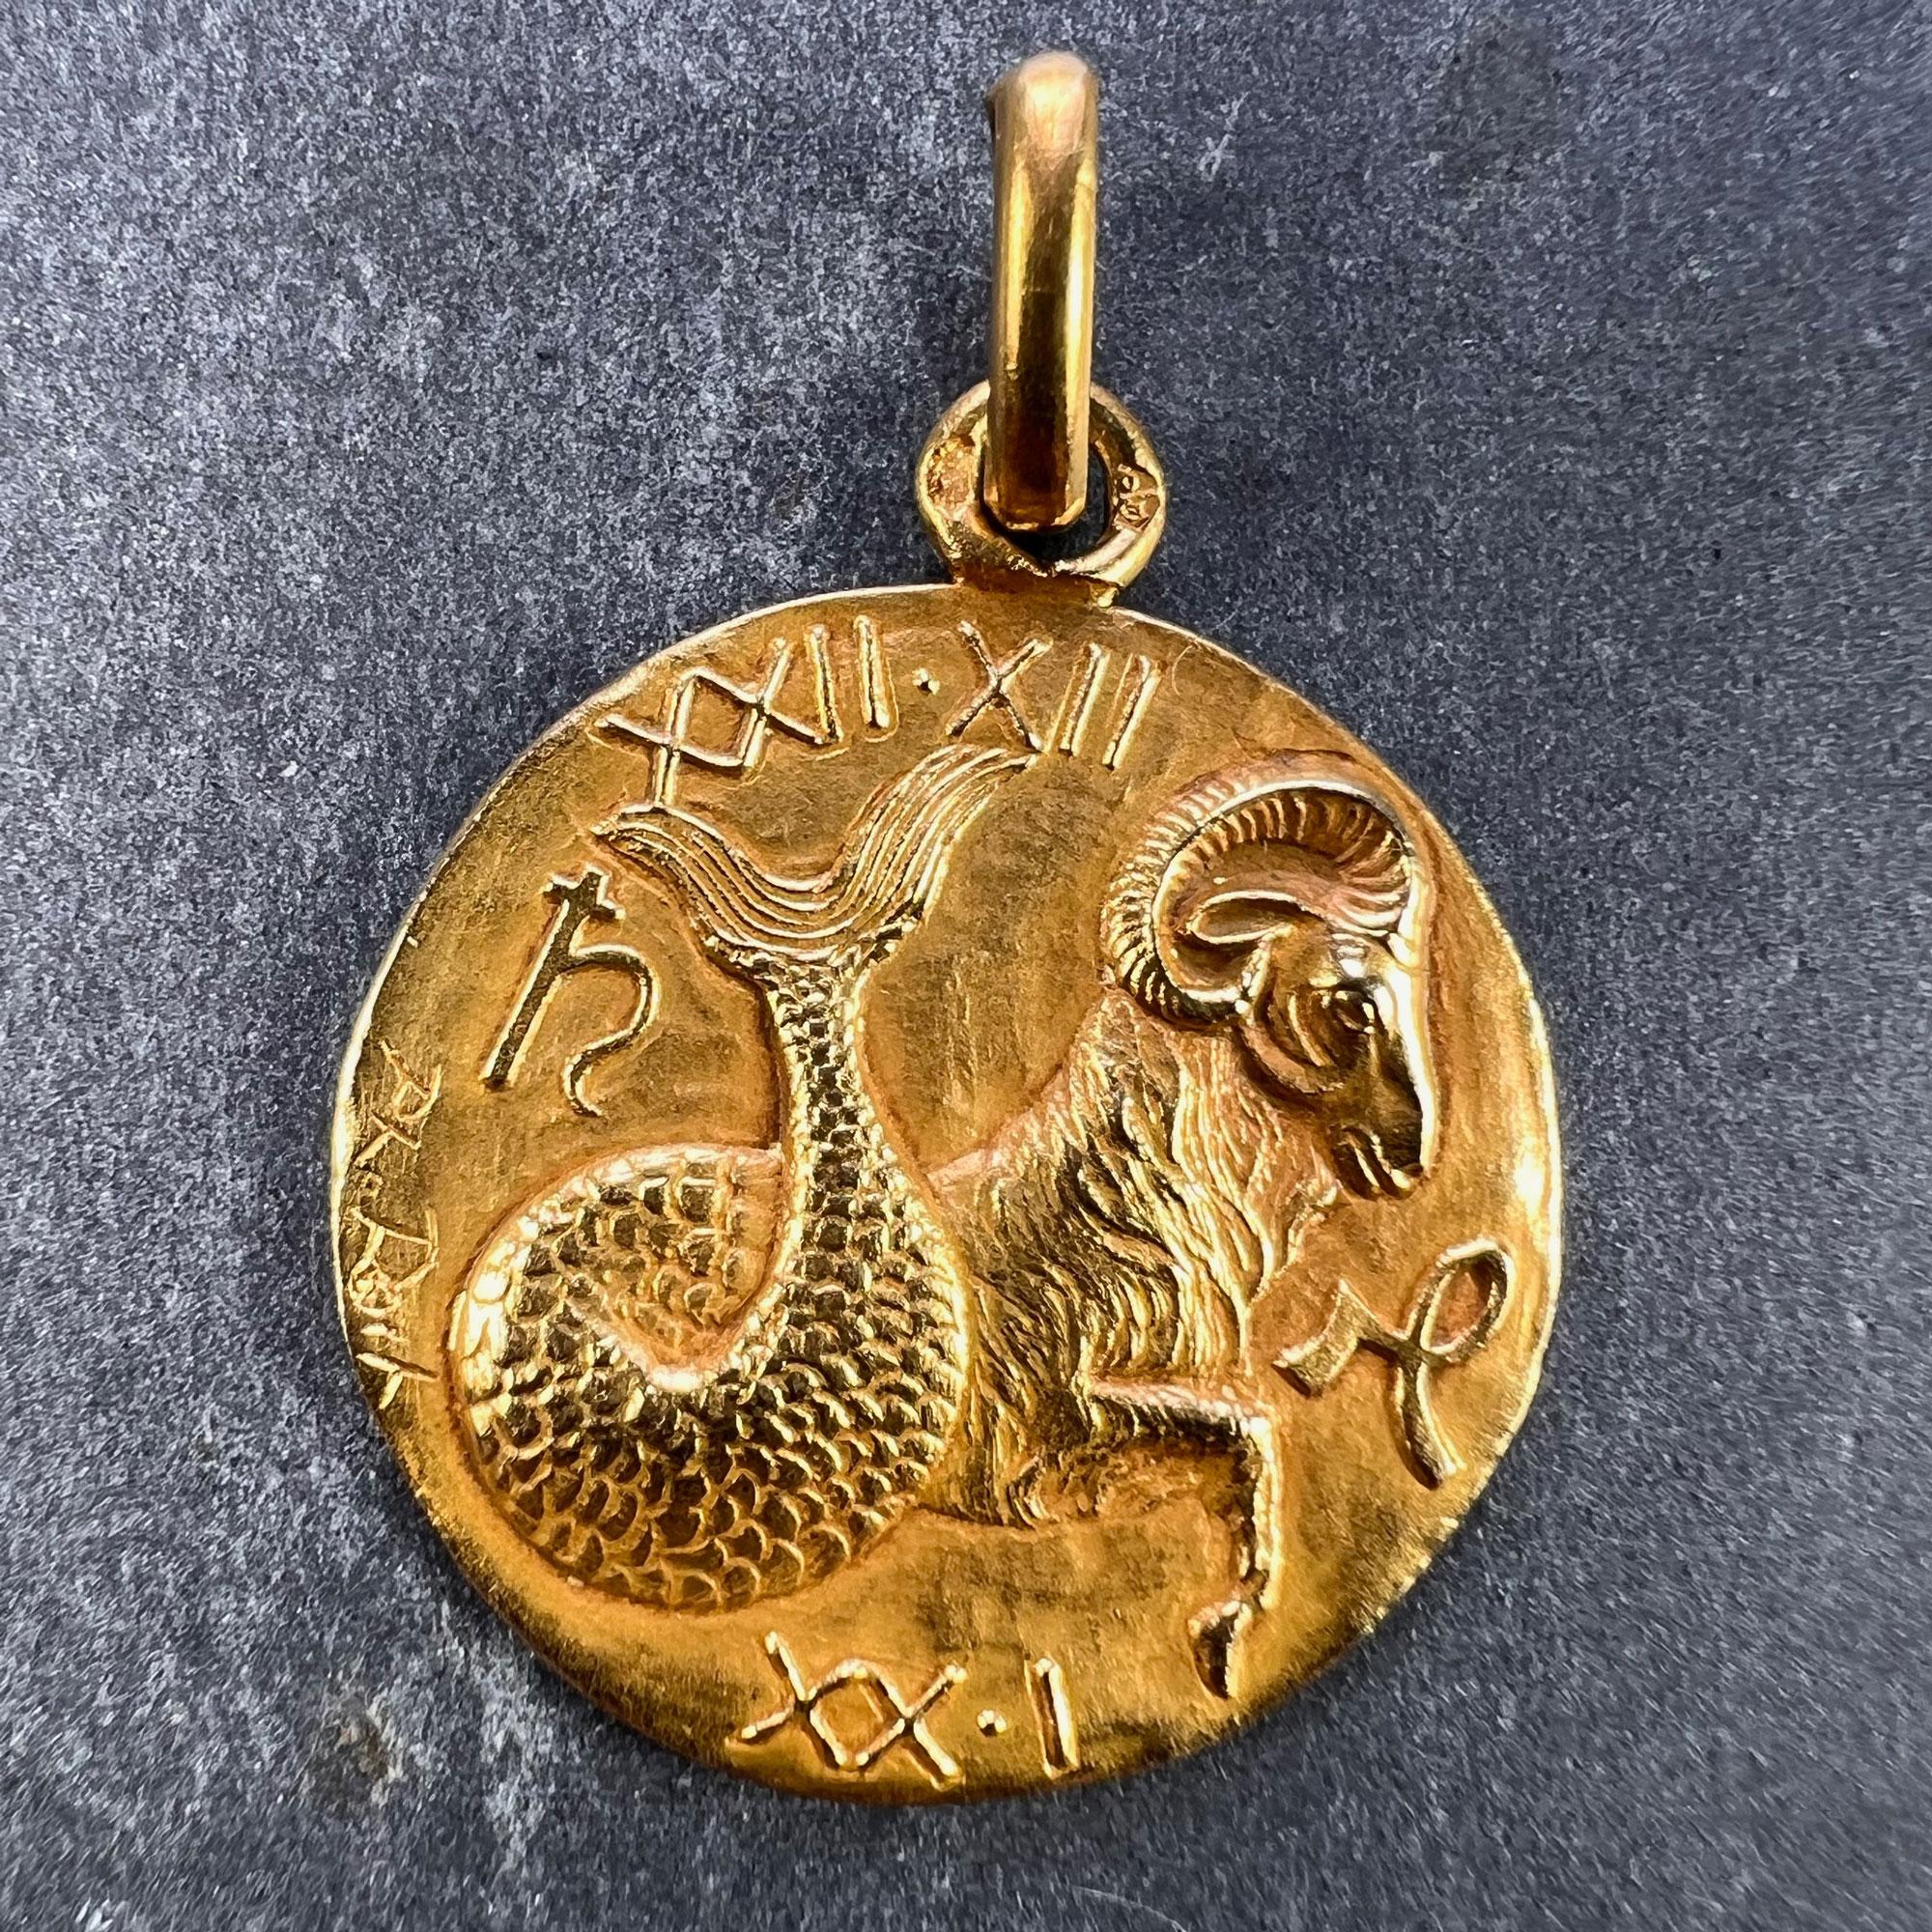 A French 18 karat (18K) gold charm pendant designed as the Zodiac sign of Capricorn in yellow gold depicting the sea-goat version of the sign along with both of the astrological symbols and the date range XXII-XII (22nd December) and XX-I (20th